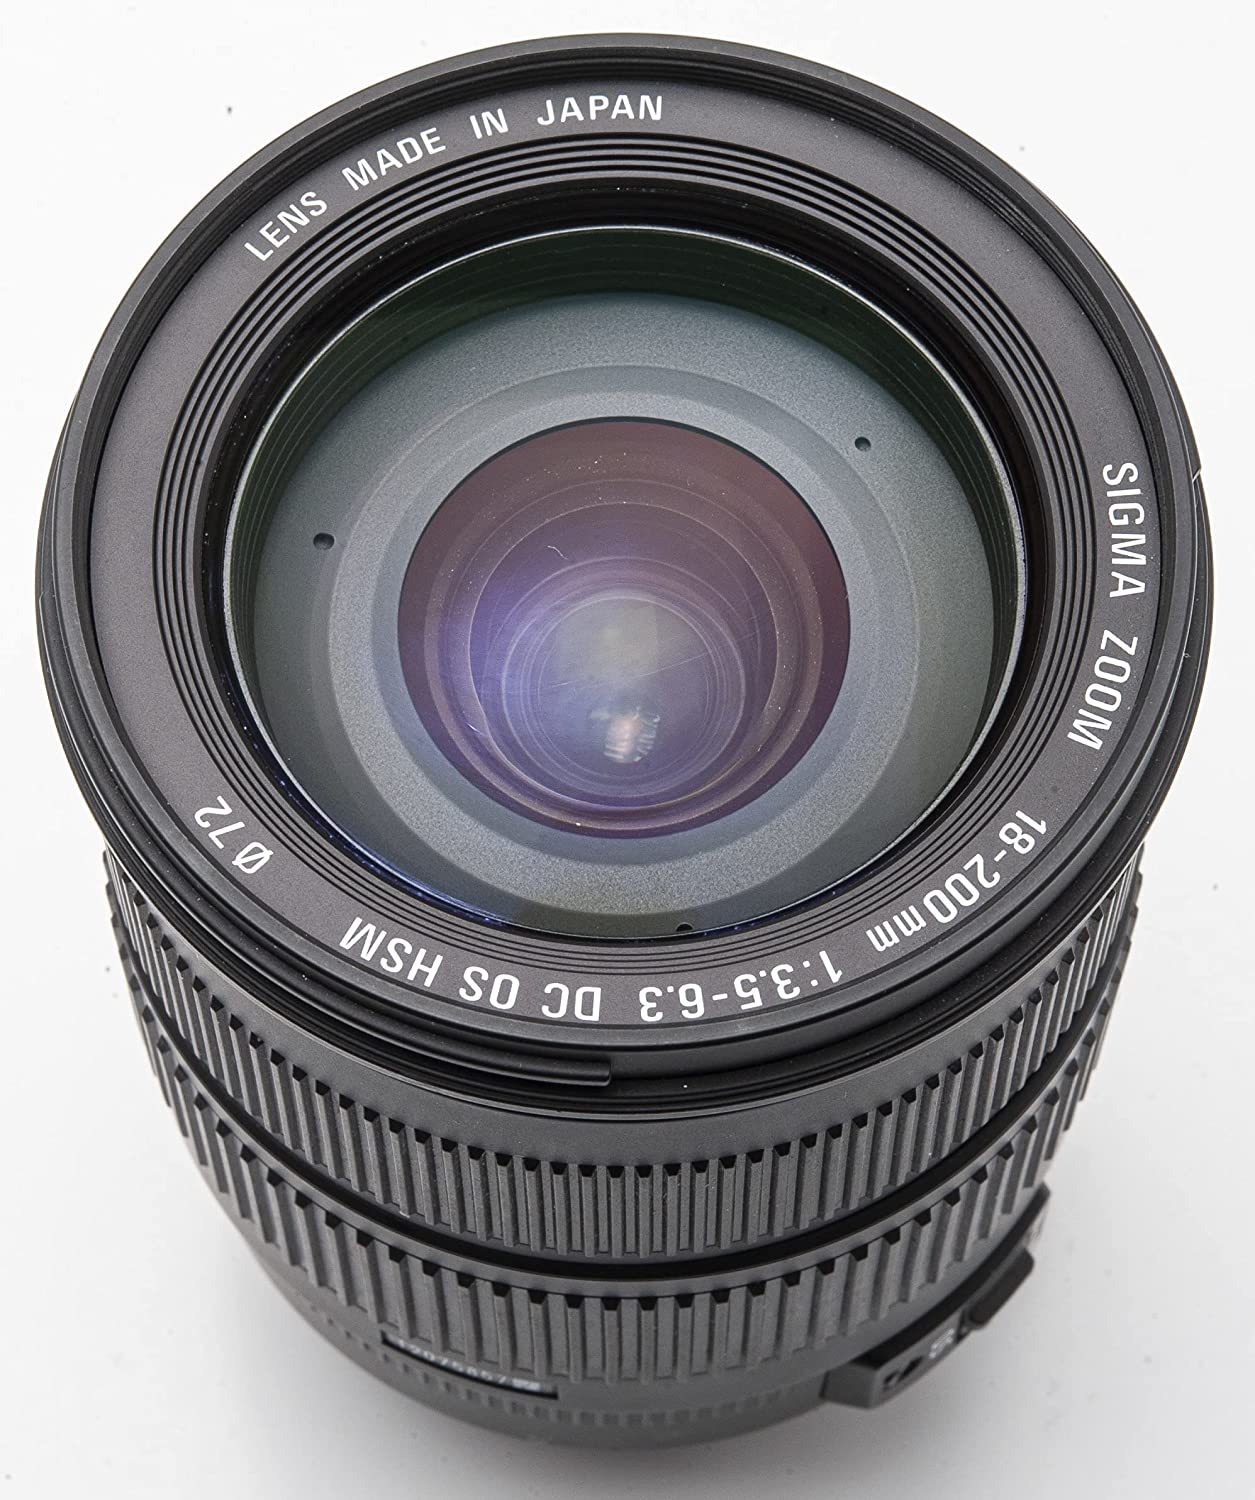 Primary image for Sigma 18-200Mm F3.5-6.3 Ii Dc Os Hsm Lens For Canon Slr Camera (Old Model)